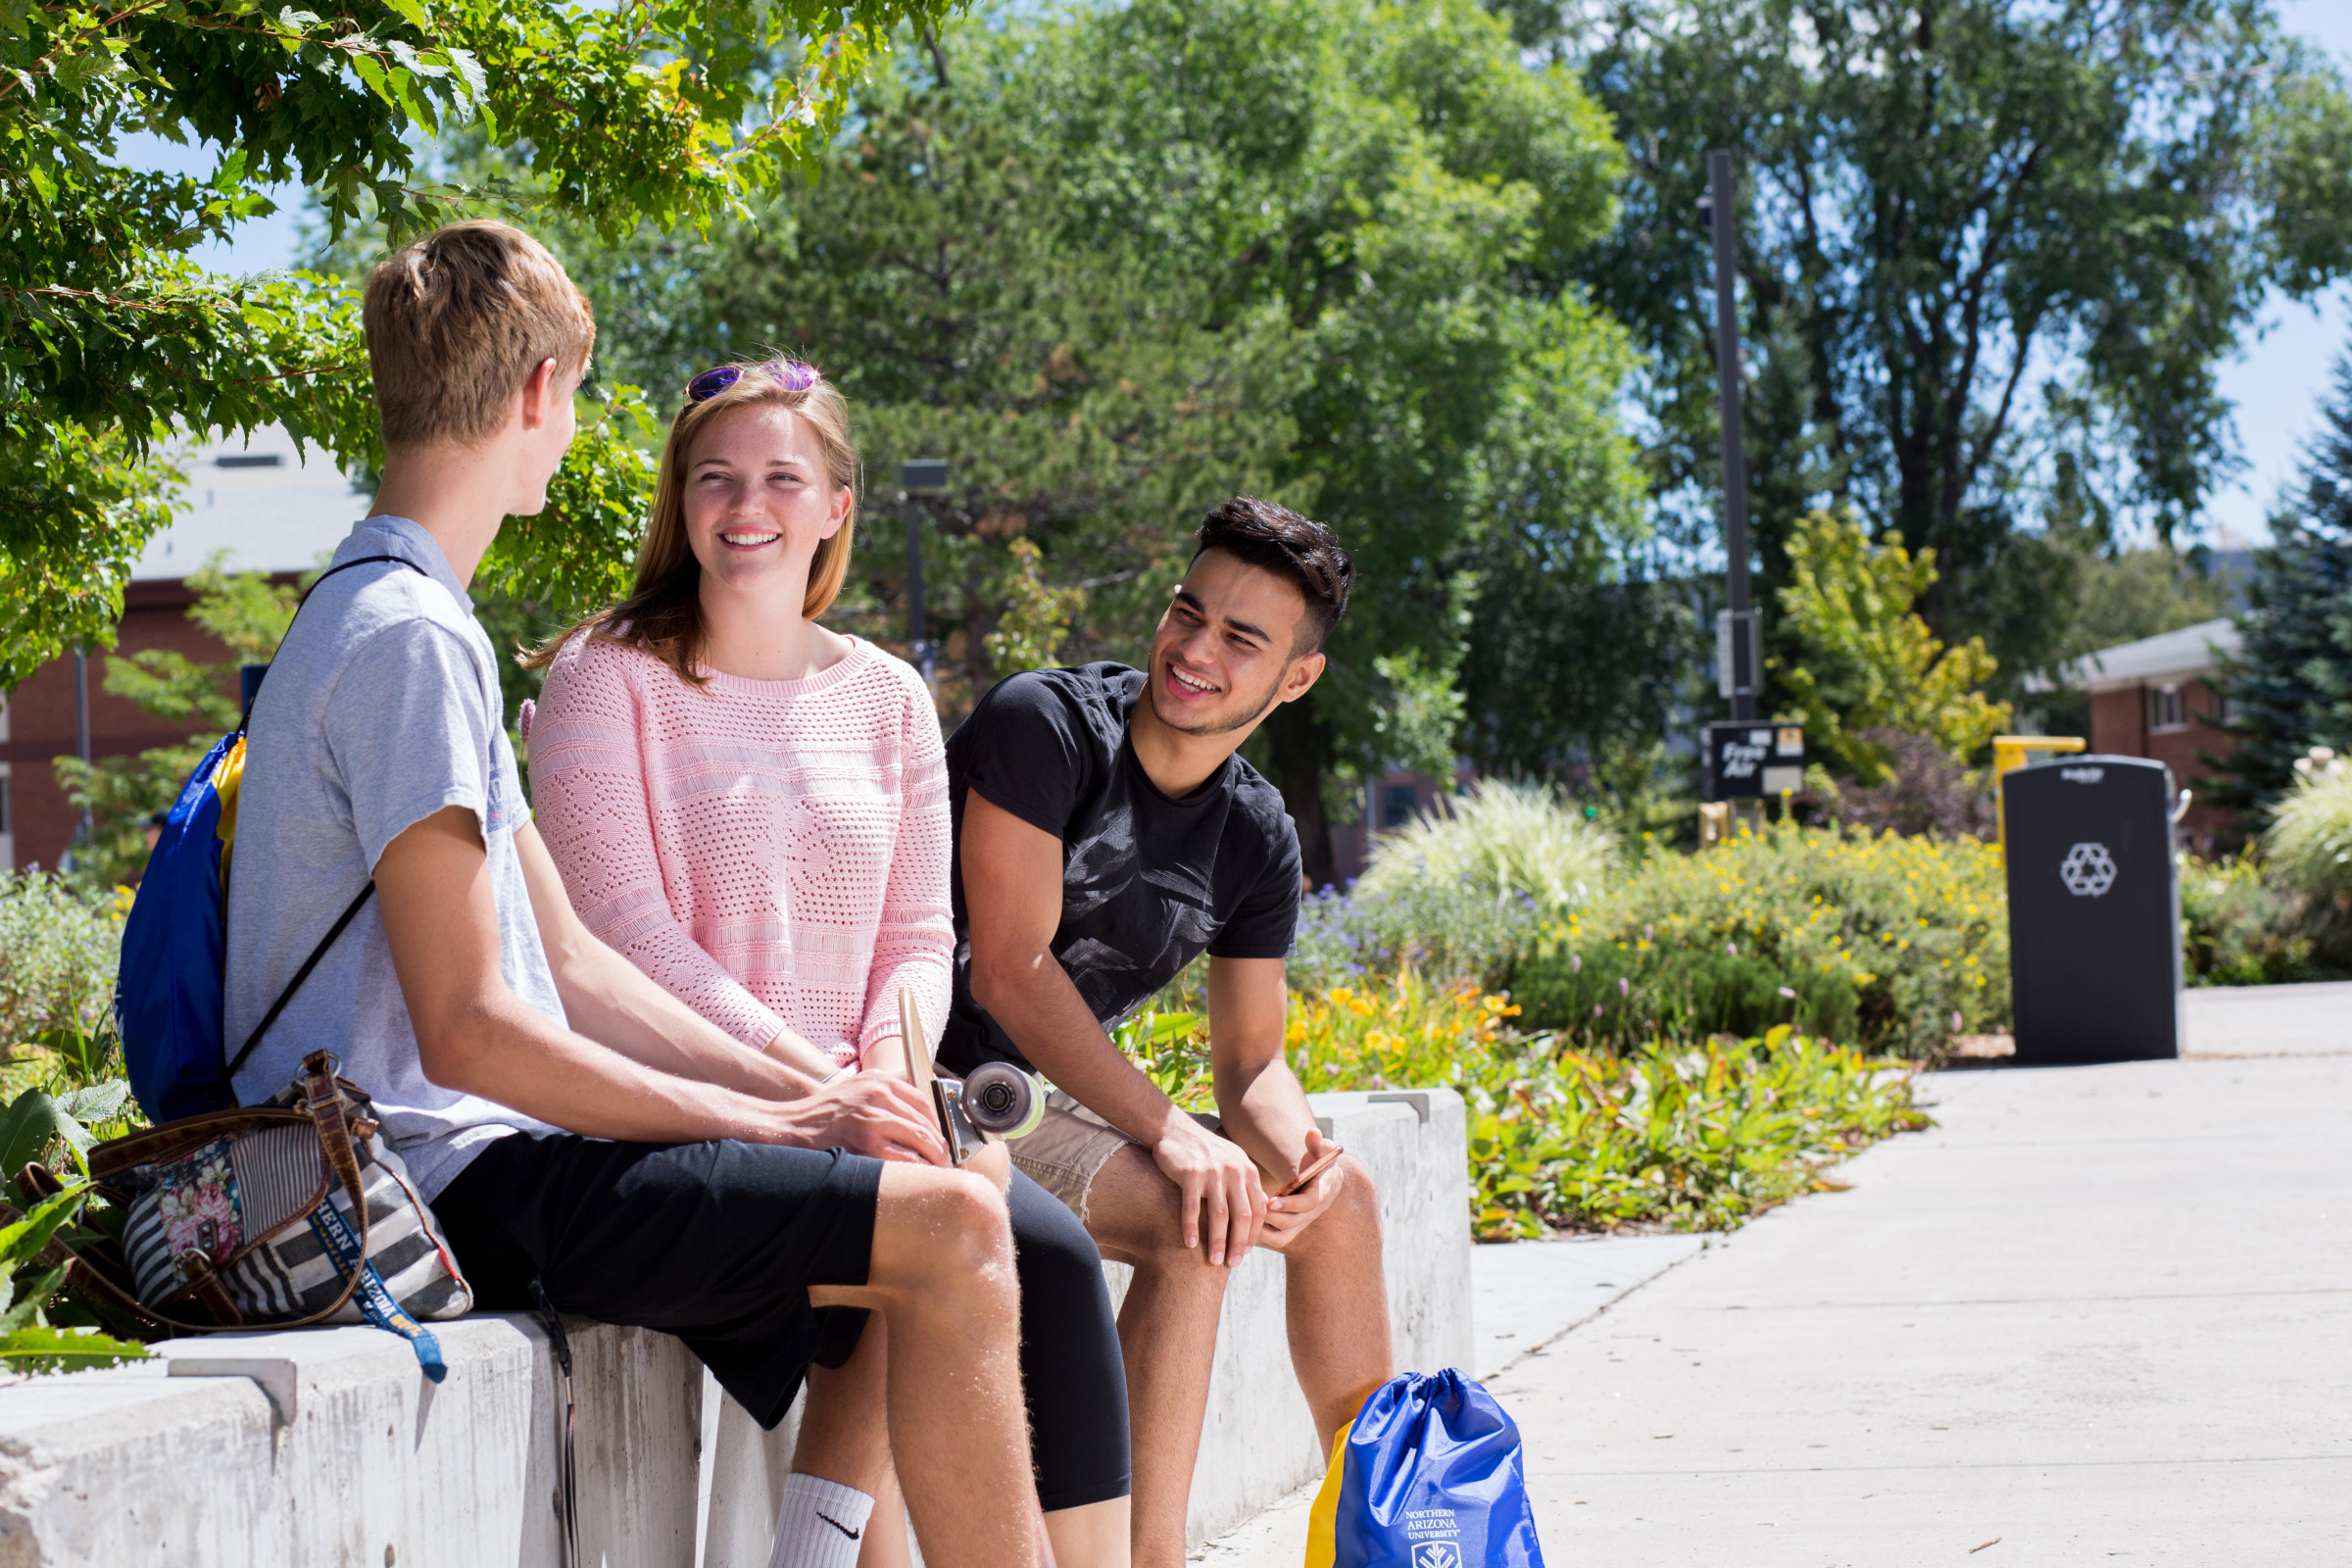 A photo of three students talking and smiling outside.